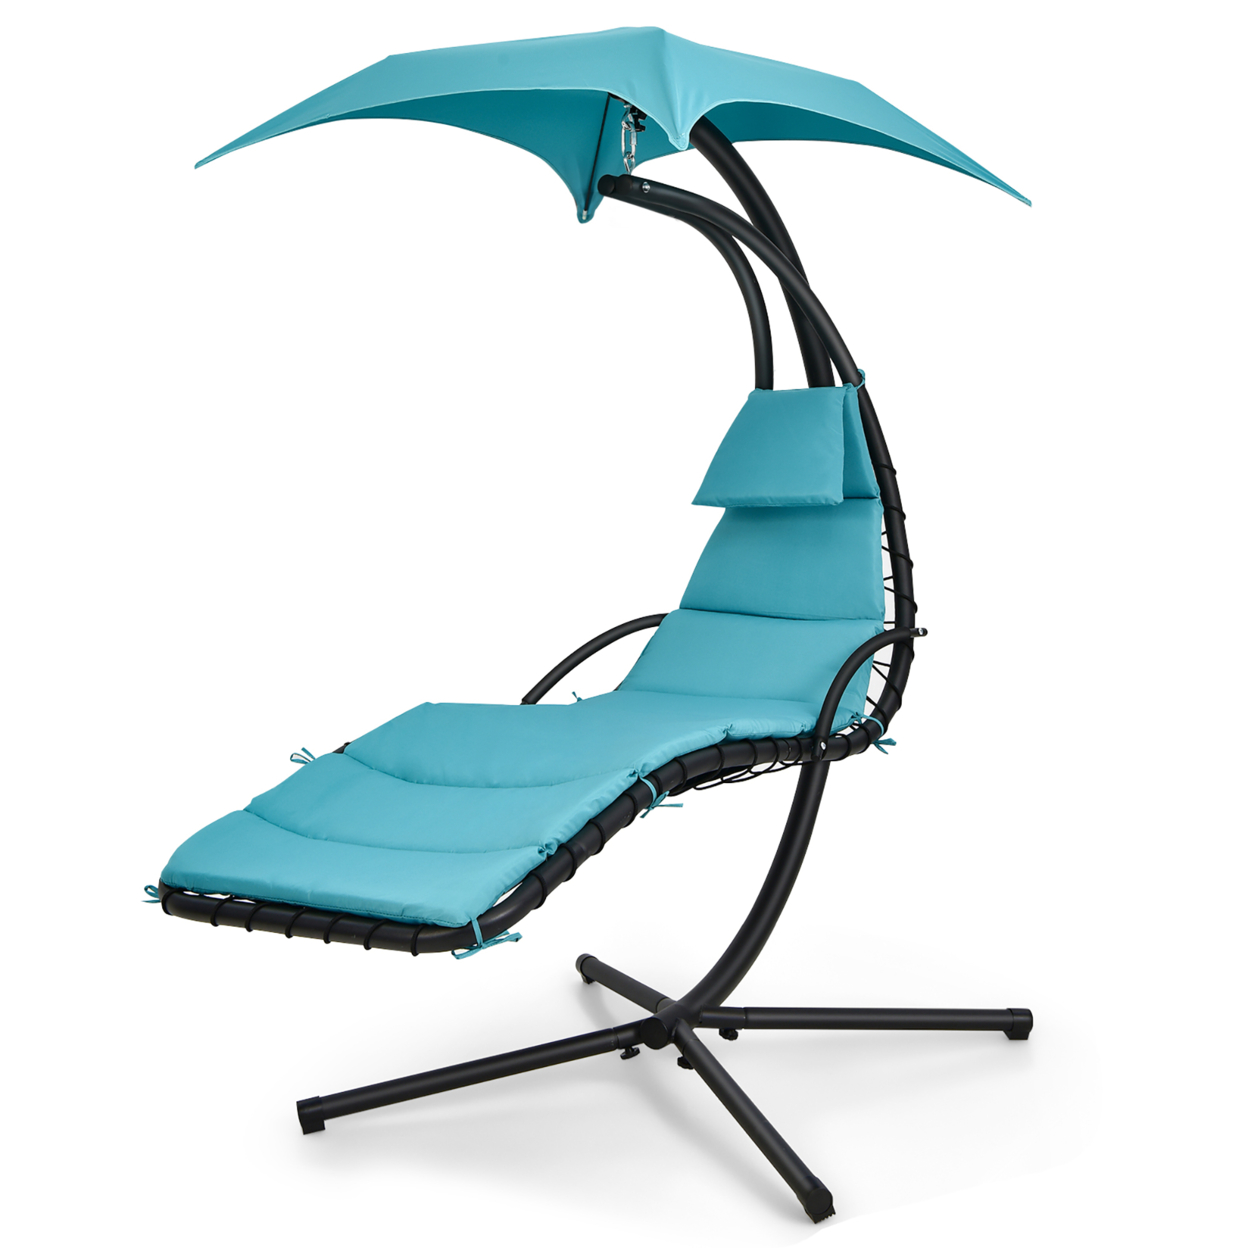 Hanging Chaise Lounge Curved Steel Patio Hammock Swing Chair W/ Overhead Light - Turquoise